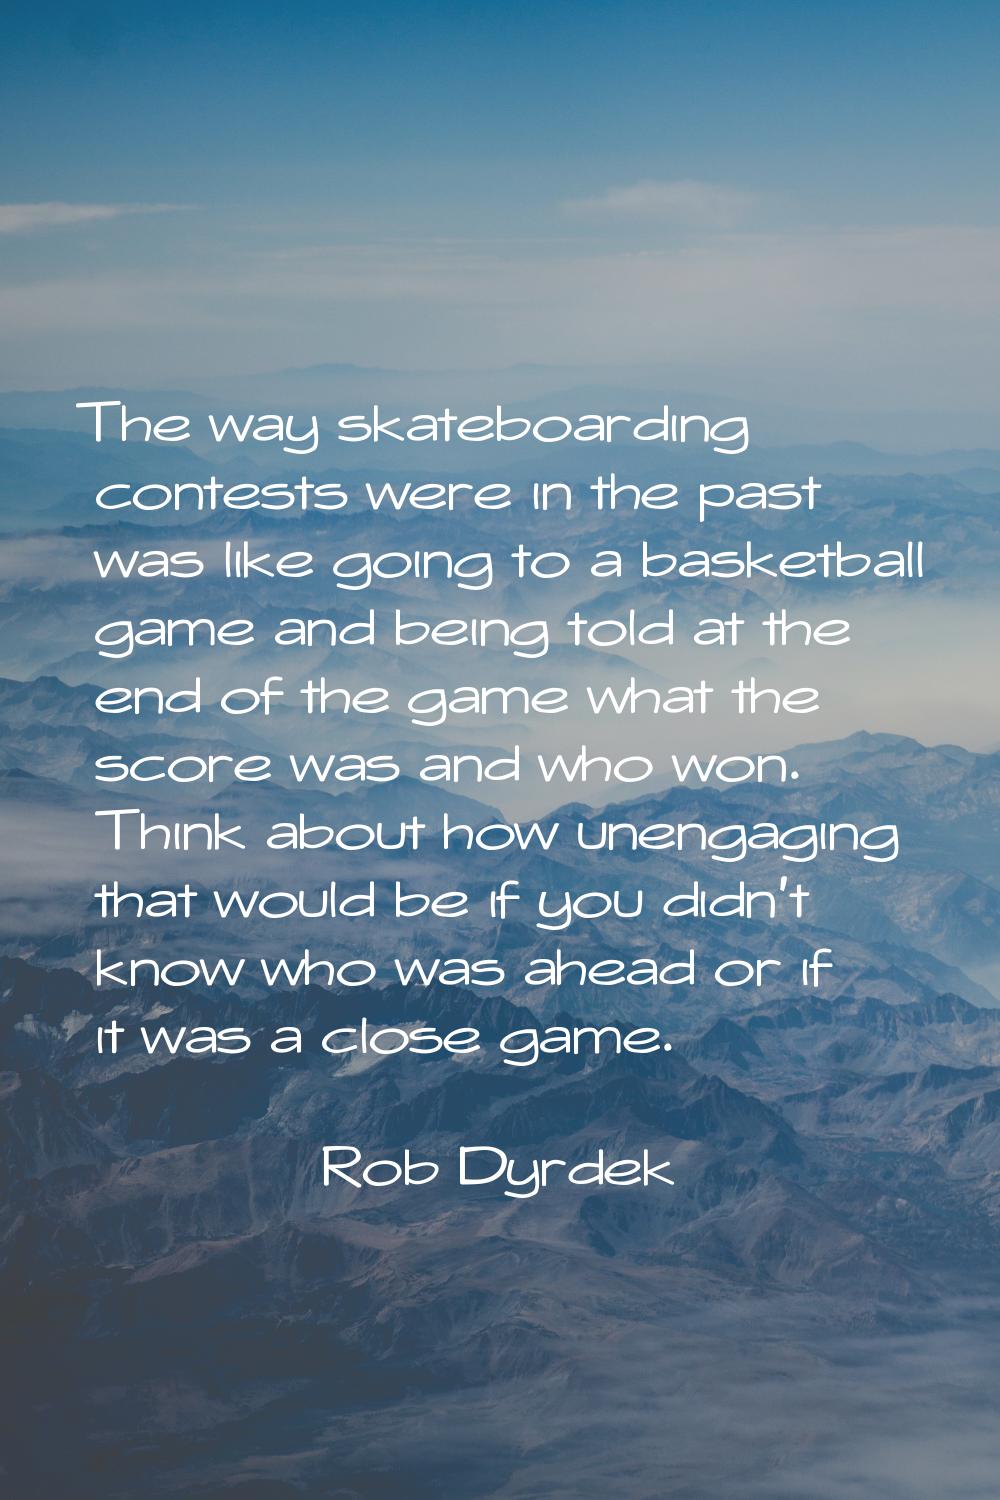 The way skateboarding contests were in the past was like going to a basketball game and being told 